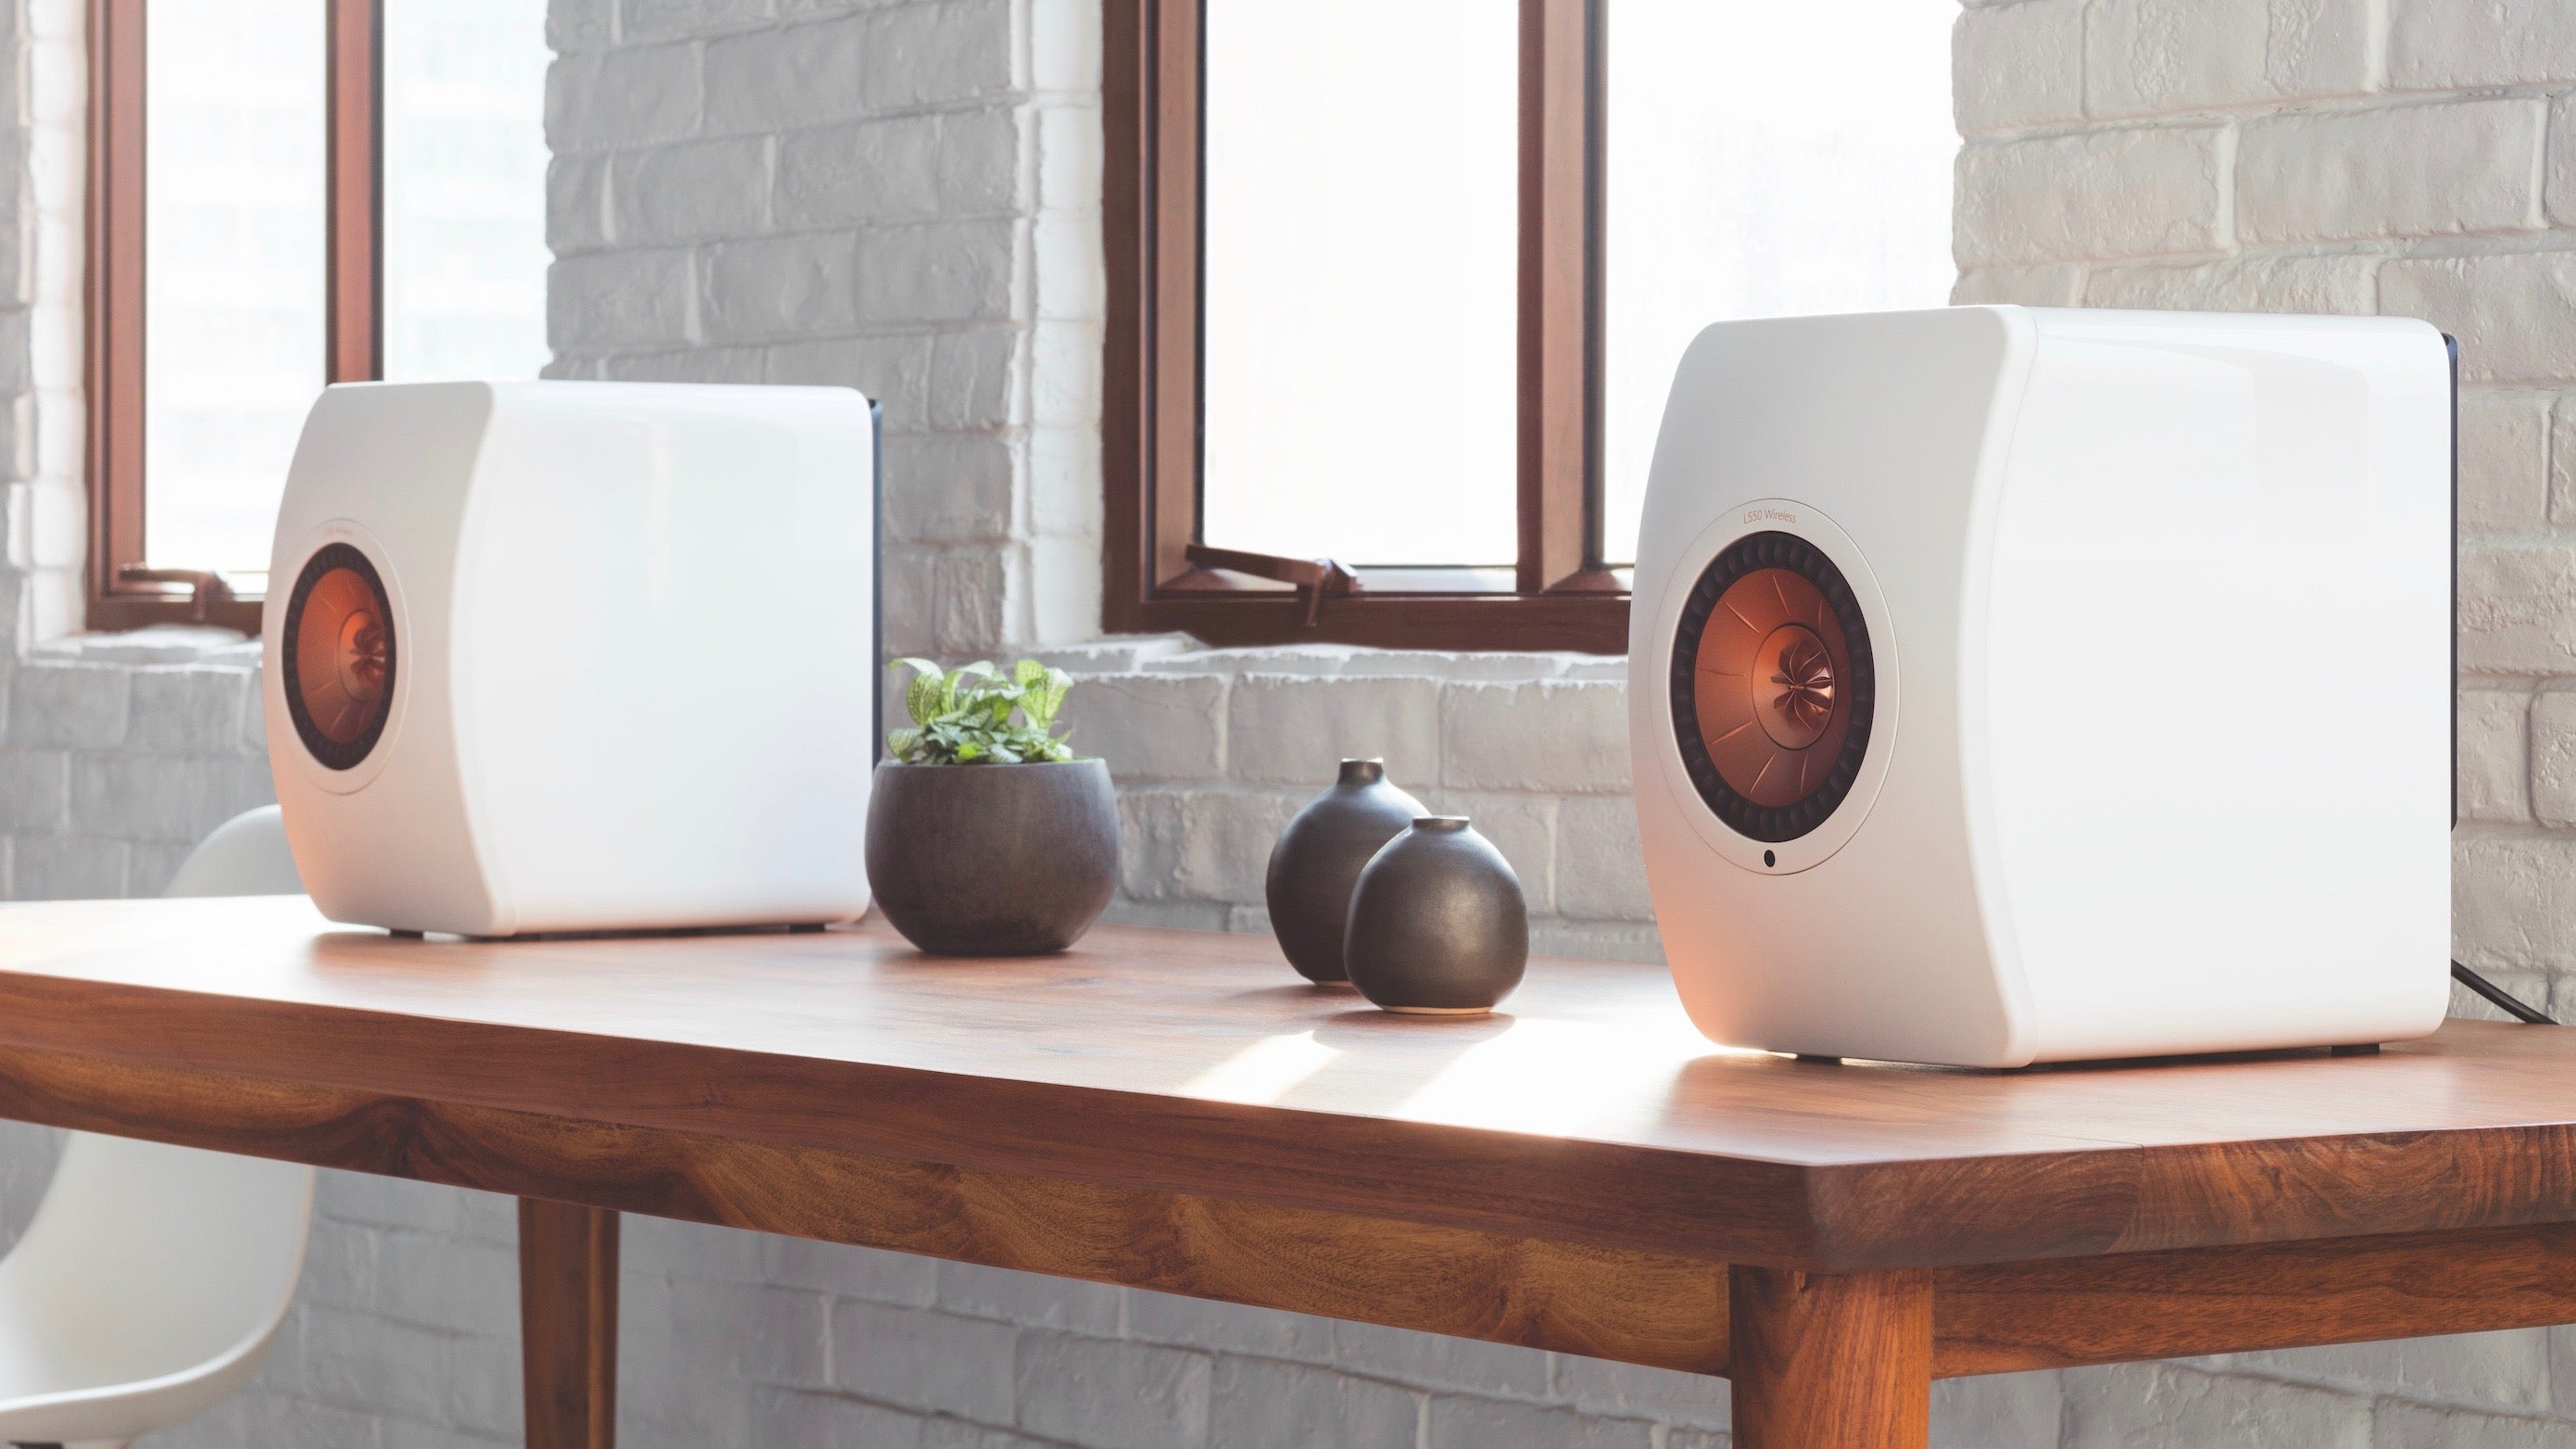 KEF LS50 Wireless speakers on a wooden table beside vases.